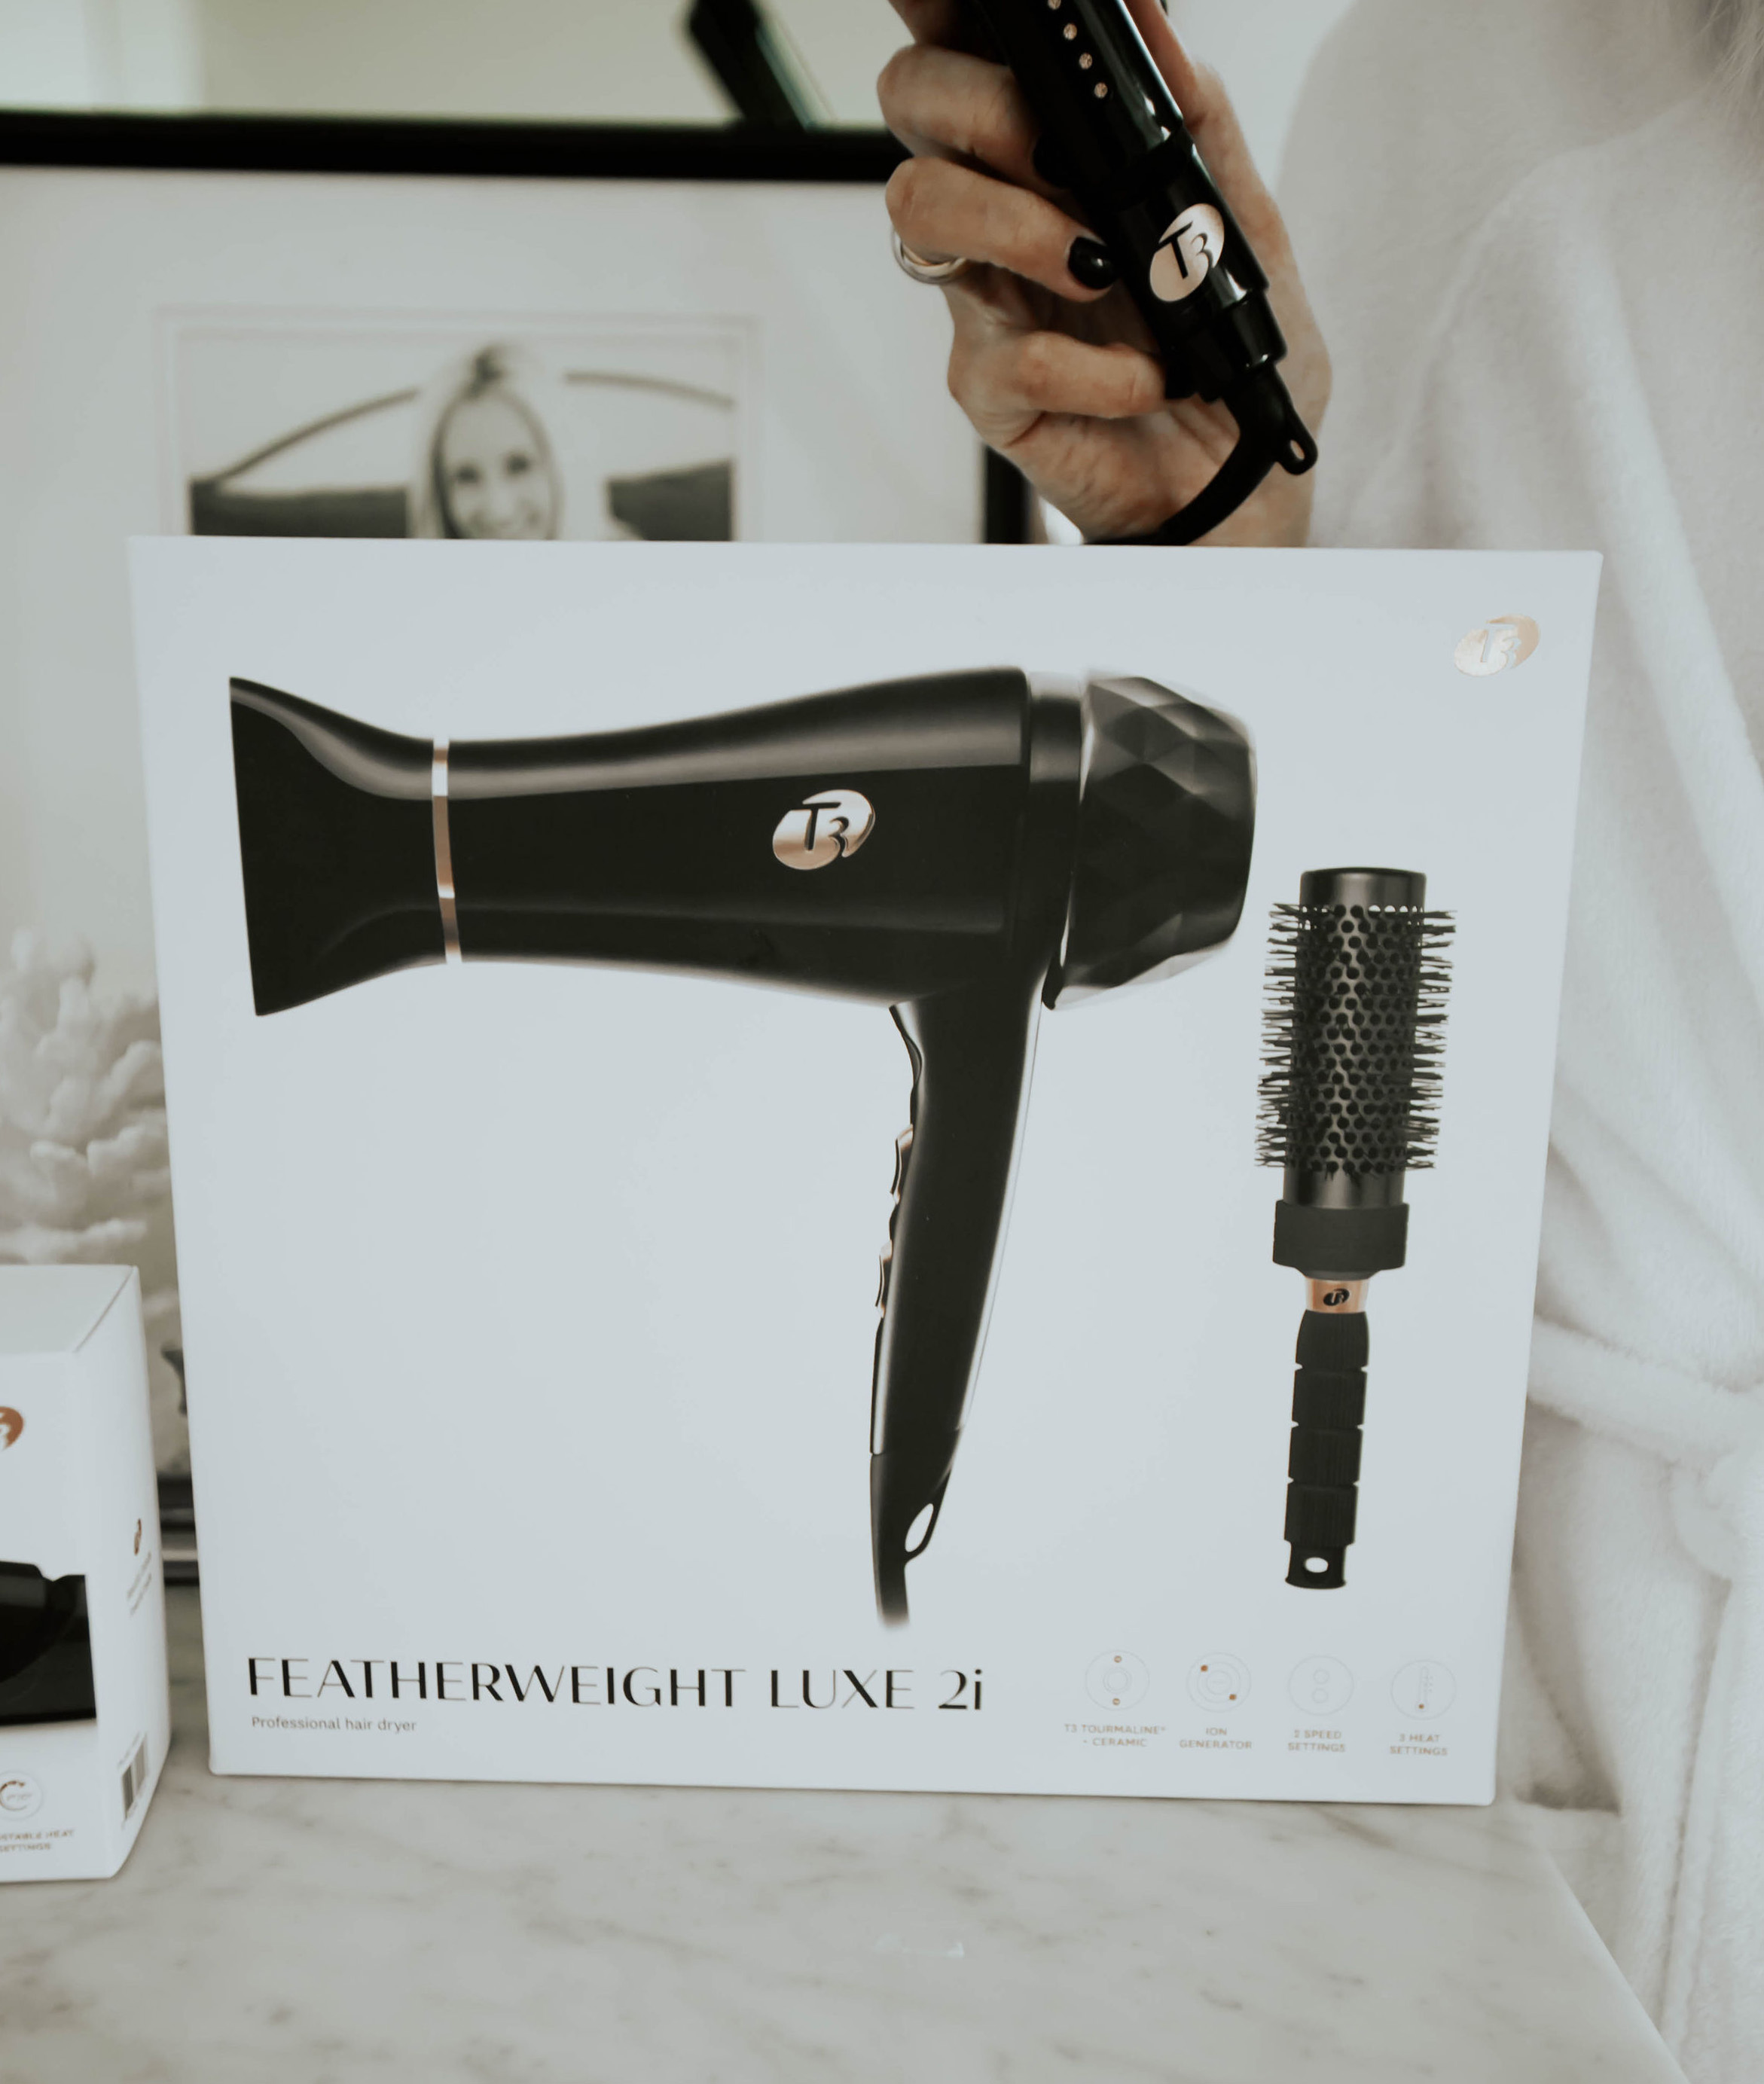 Reno, Nevada Blogger, Emily Farren Wieczorek shares How To Curl Your Hair With A Straightener - a step by step tutorial and a HUGE QVC deal on T3 Hair Tools.